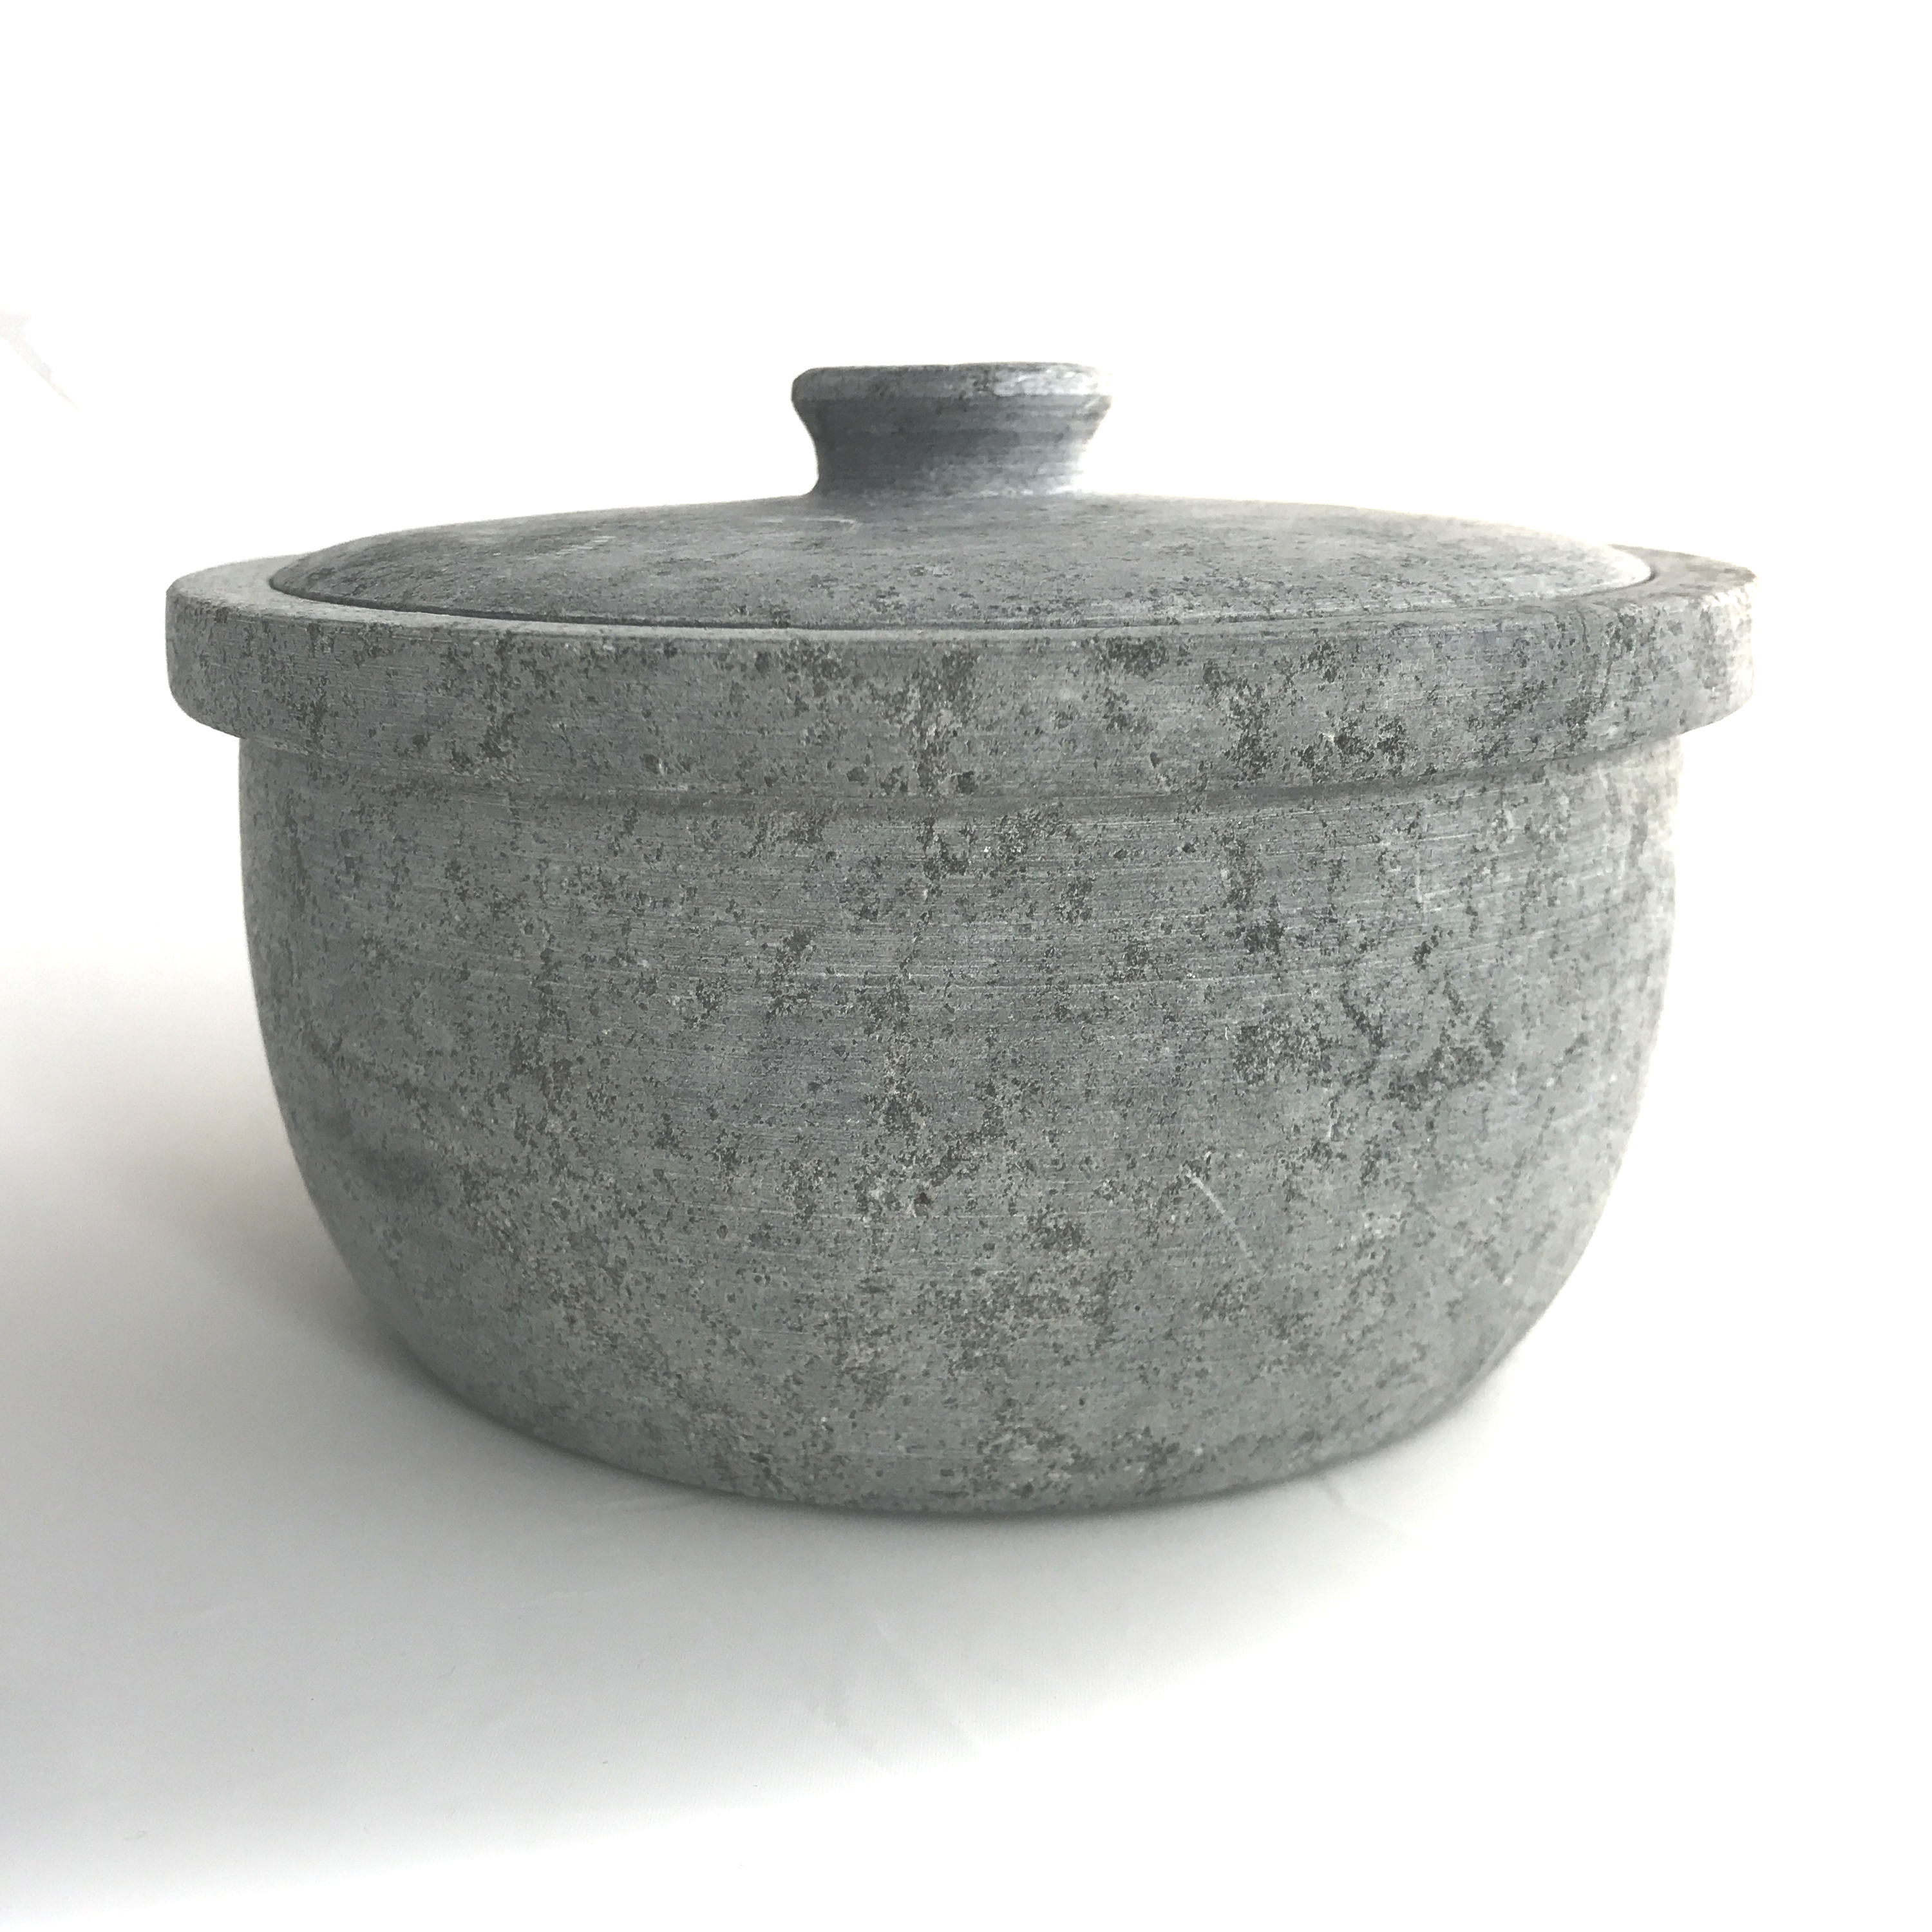 https://ancientcookware.com/images/stories/virtuemart/product/ind_2050_08_02%20Large.jpg